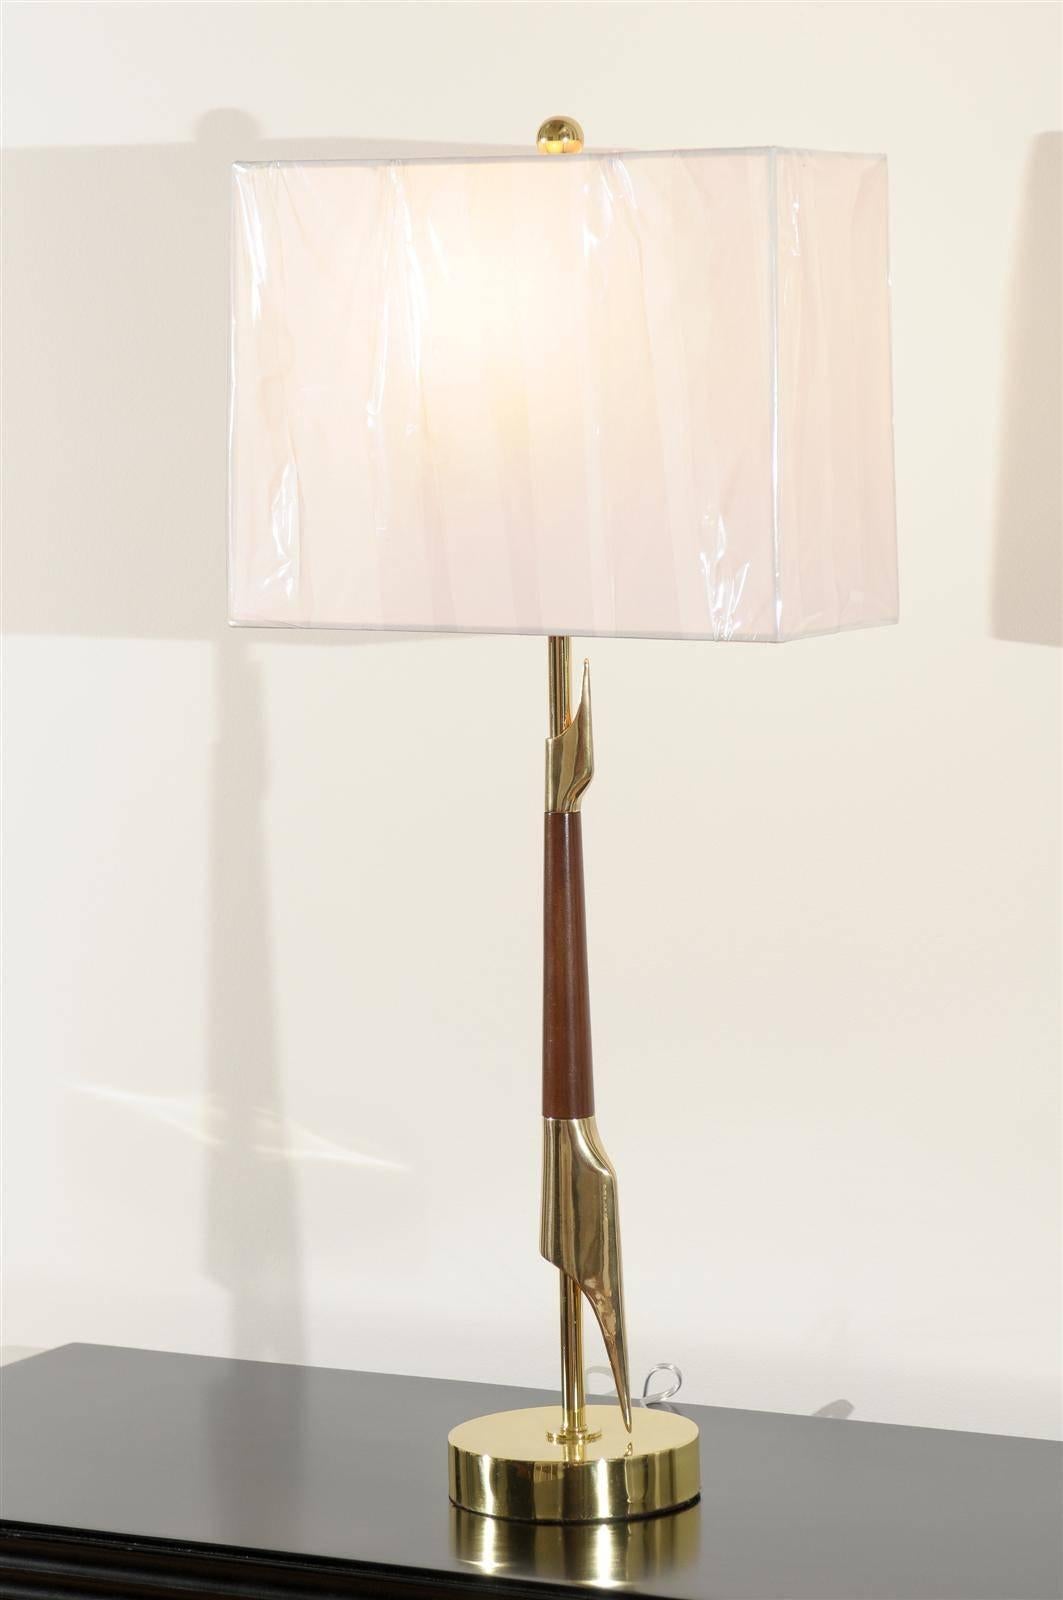 An exquisite pair of lamps from a difficult to find series by Rembrandt, circa 1960. A tall, elegant modern design executed in walnut and brass. Fabulous Jewelry! Excellent restored condition. Rewired using clear cord, new brass three-way sockets